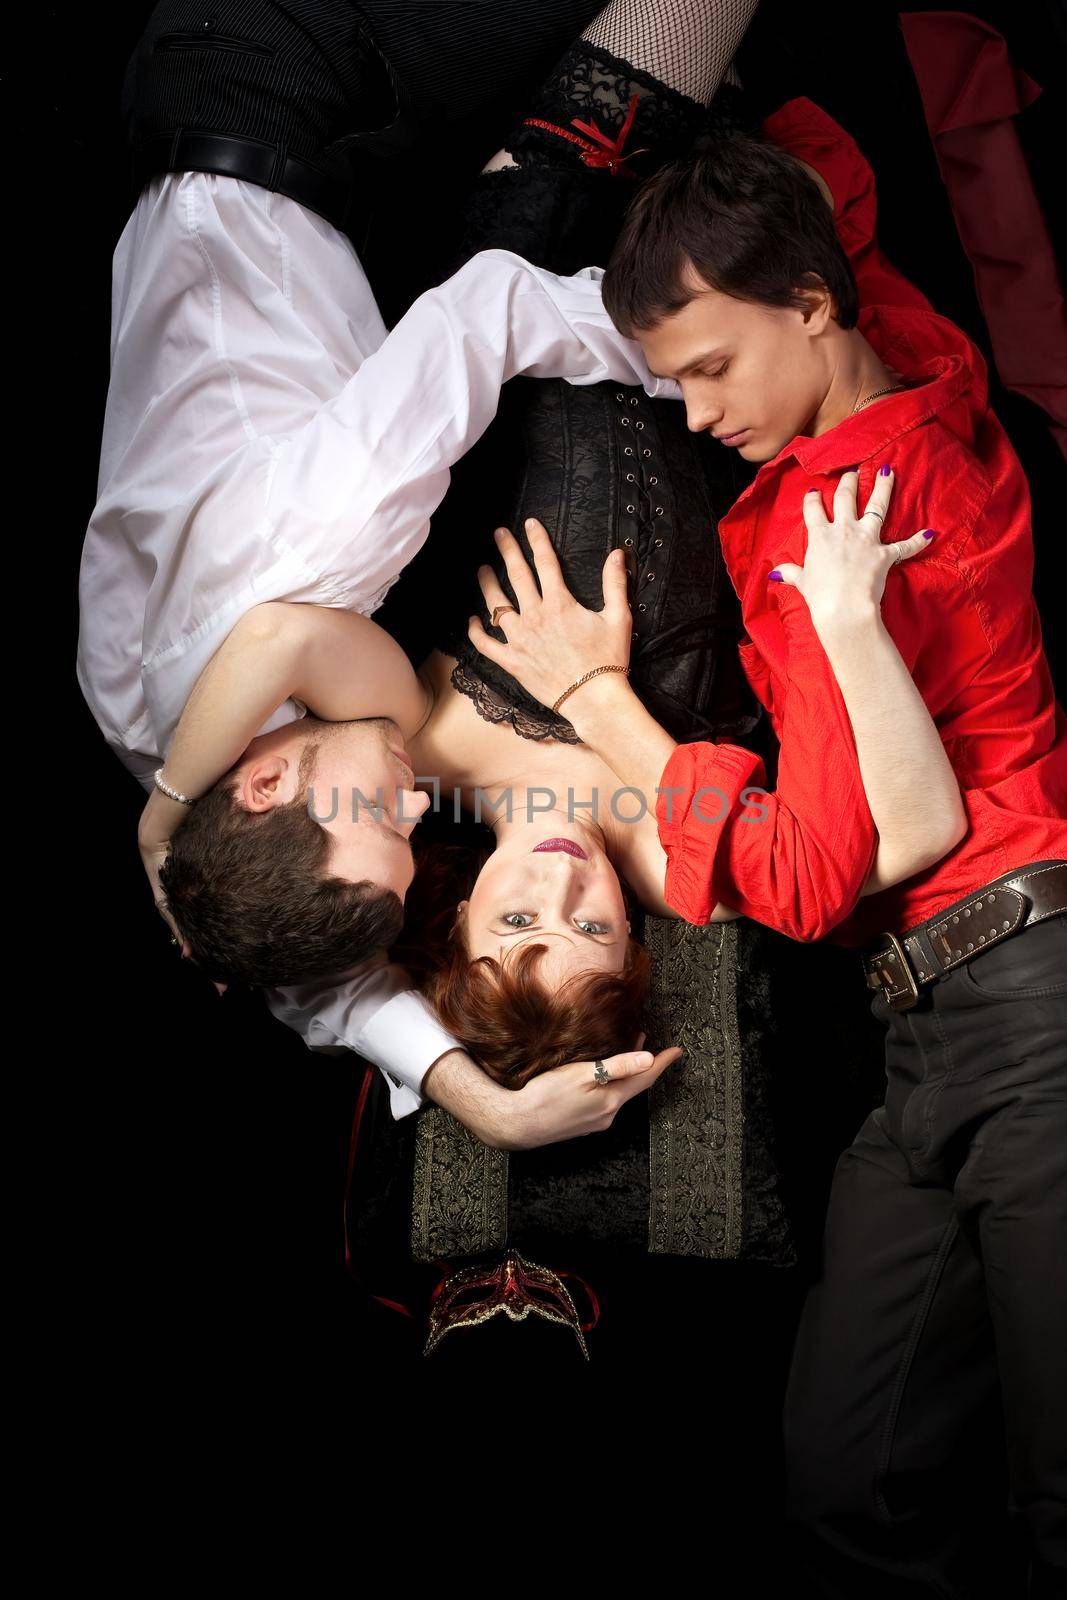 red woman in mask and two men - decadence scene